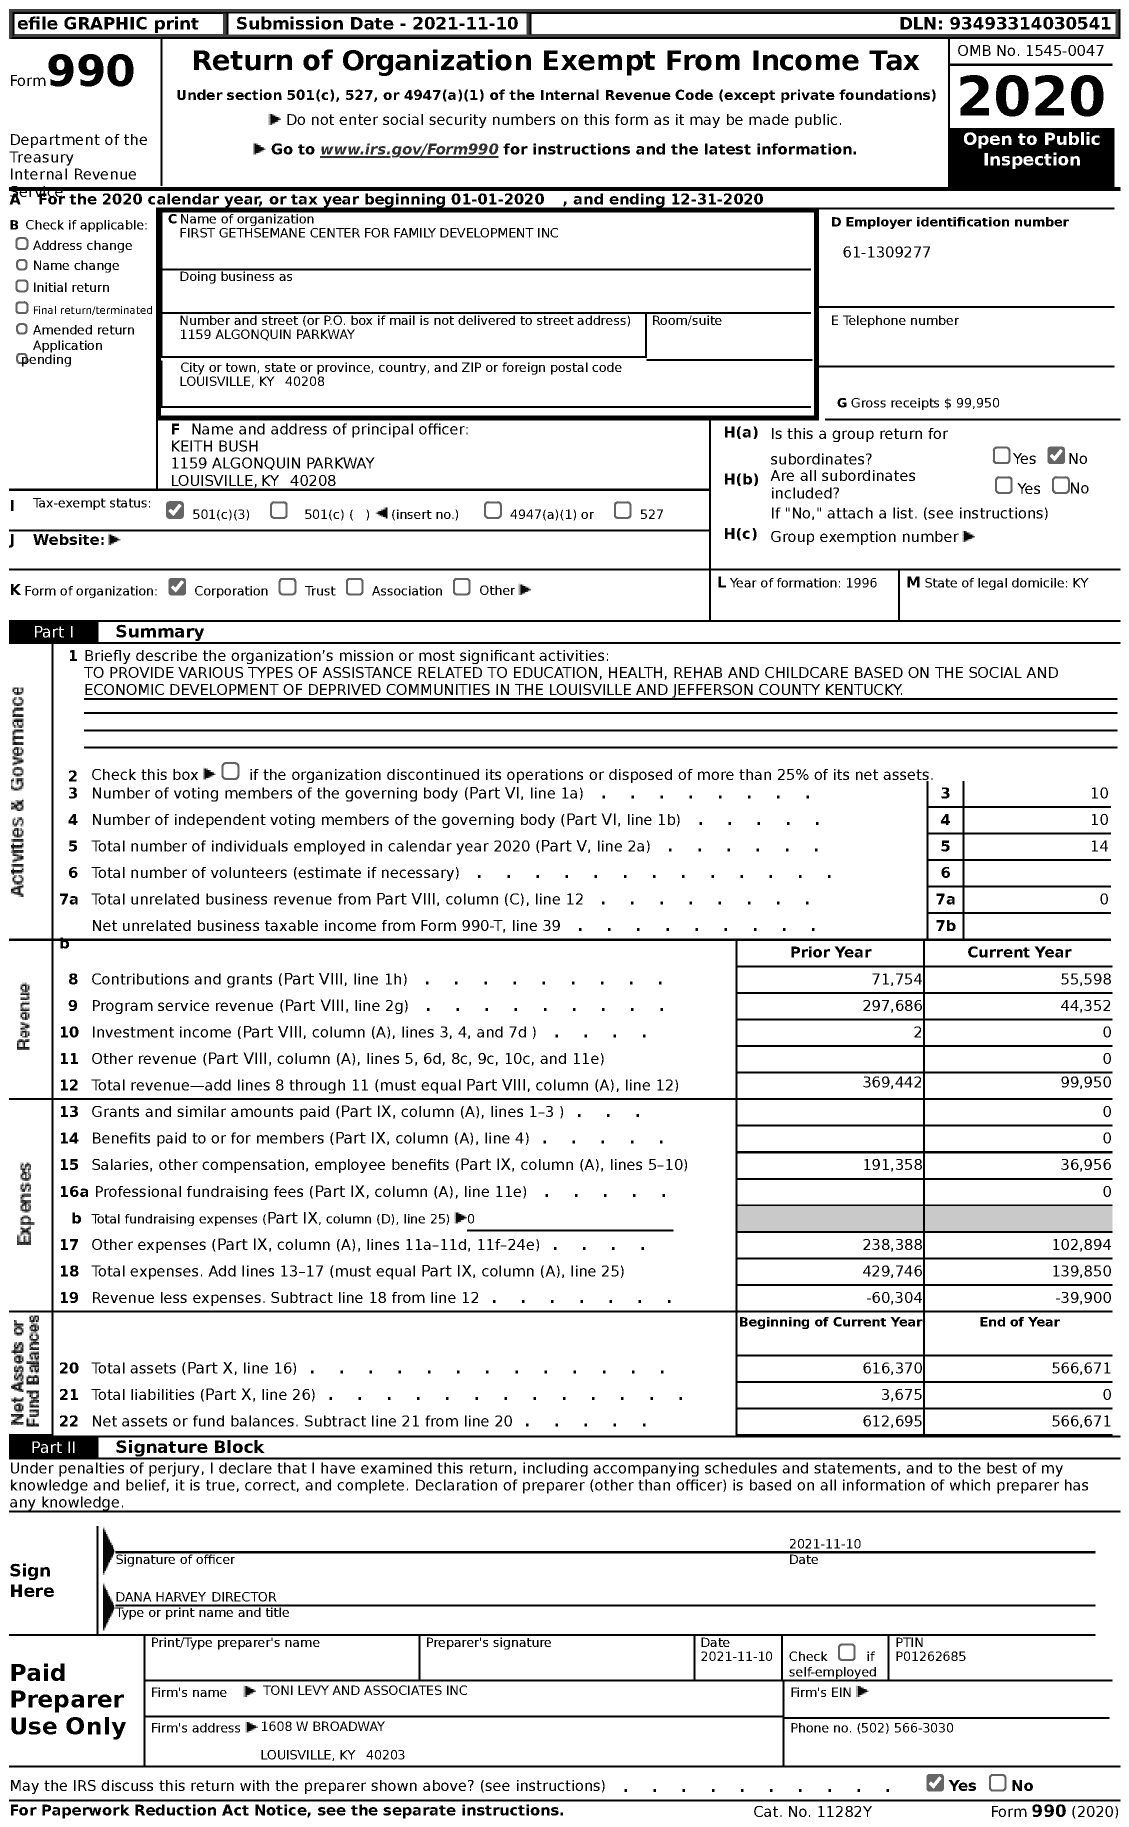 Image of first page of 2020 Form 990 for First Gethsemane Center for Family Development